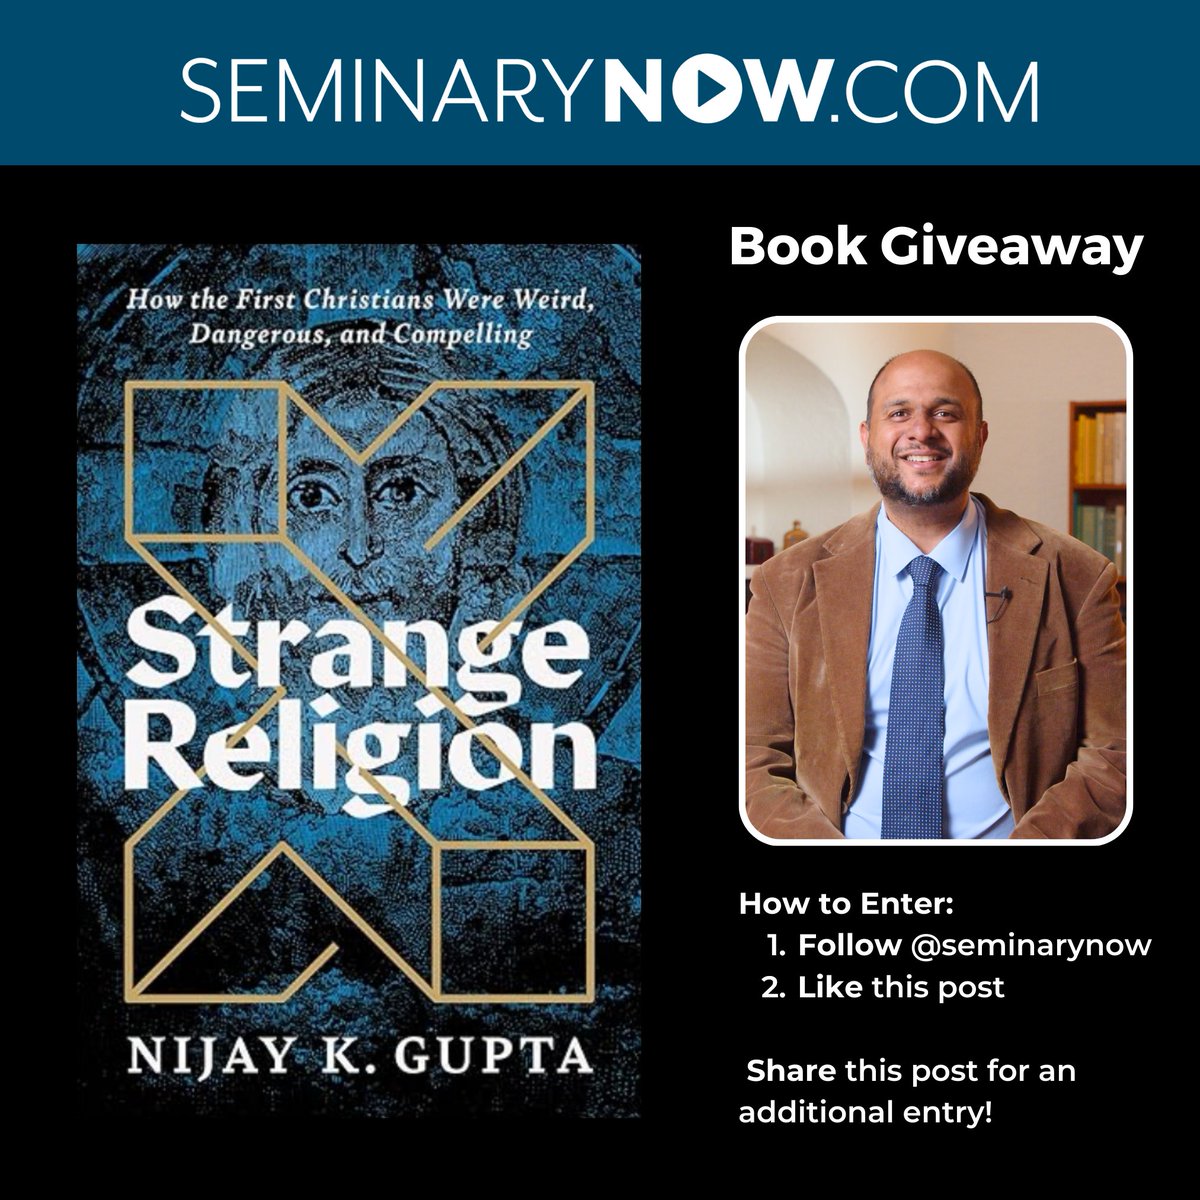 📚 BOOK GIVEAWAY ALERT! 🎉 Want to win a free copy of Strange Religion from @nijayKgupta? We're giving away this must-read! To enter: 1. Follow our page 2. Like this post 3. Tag a friend who'd love this book Today is the last day to enter! #giveaway #reading #Christian